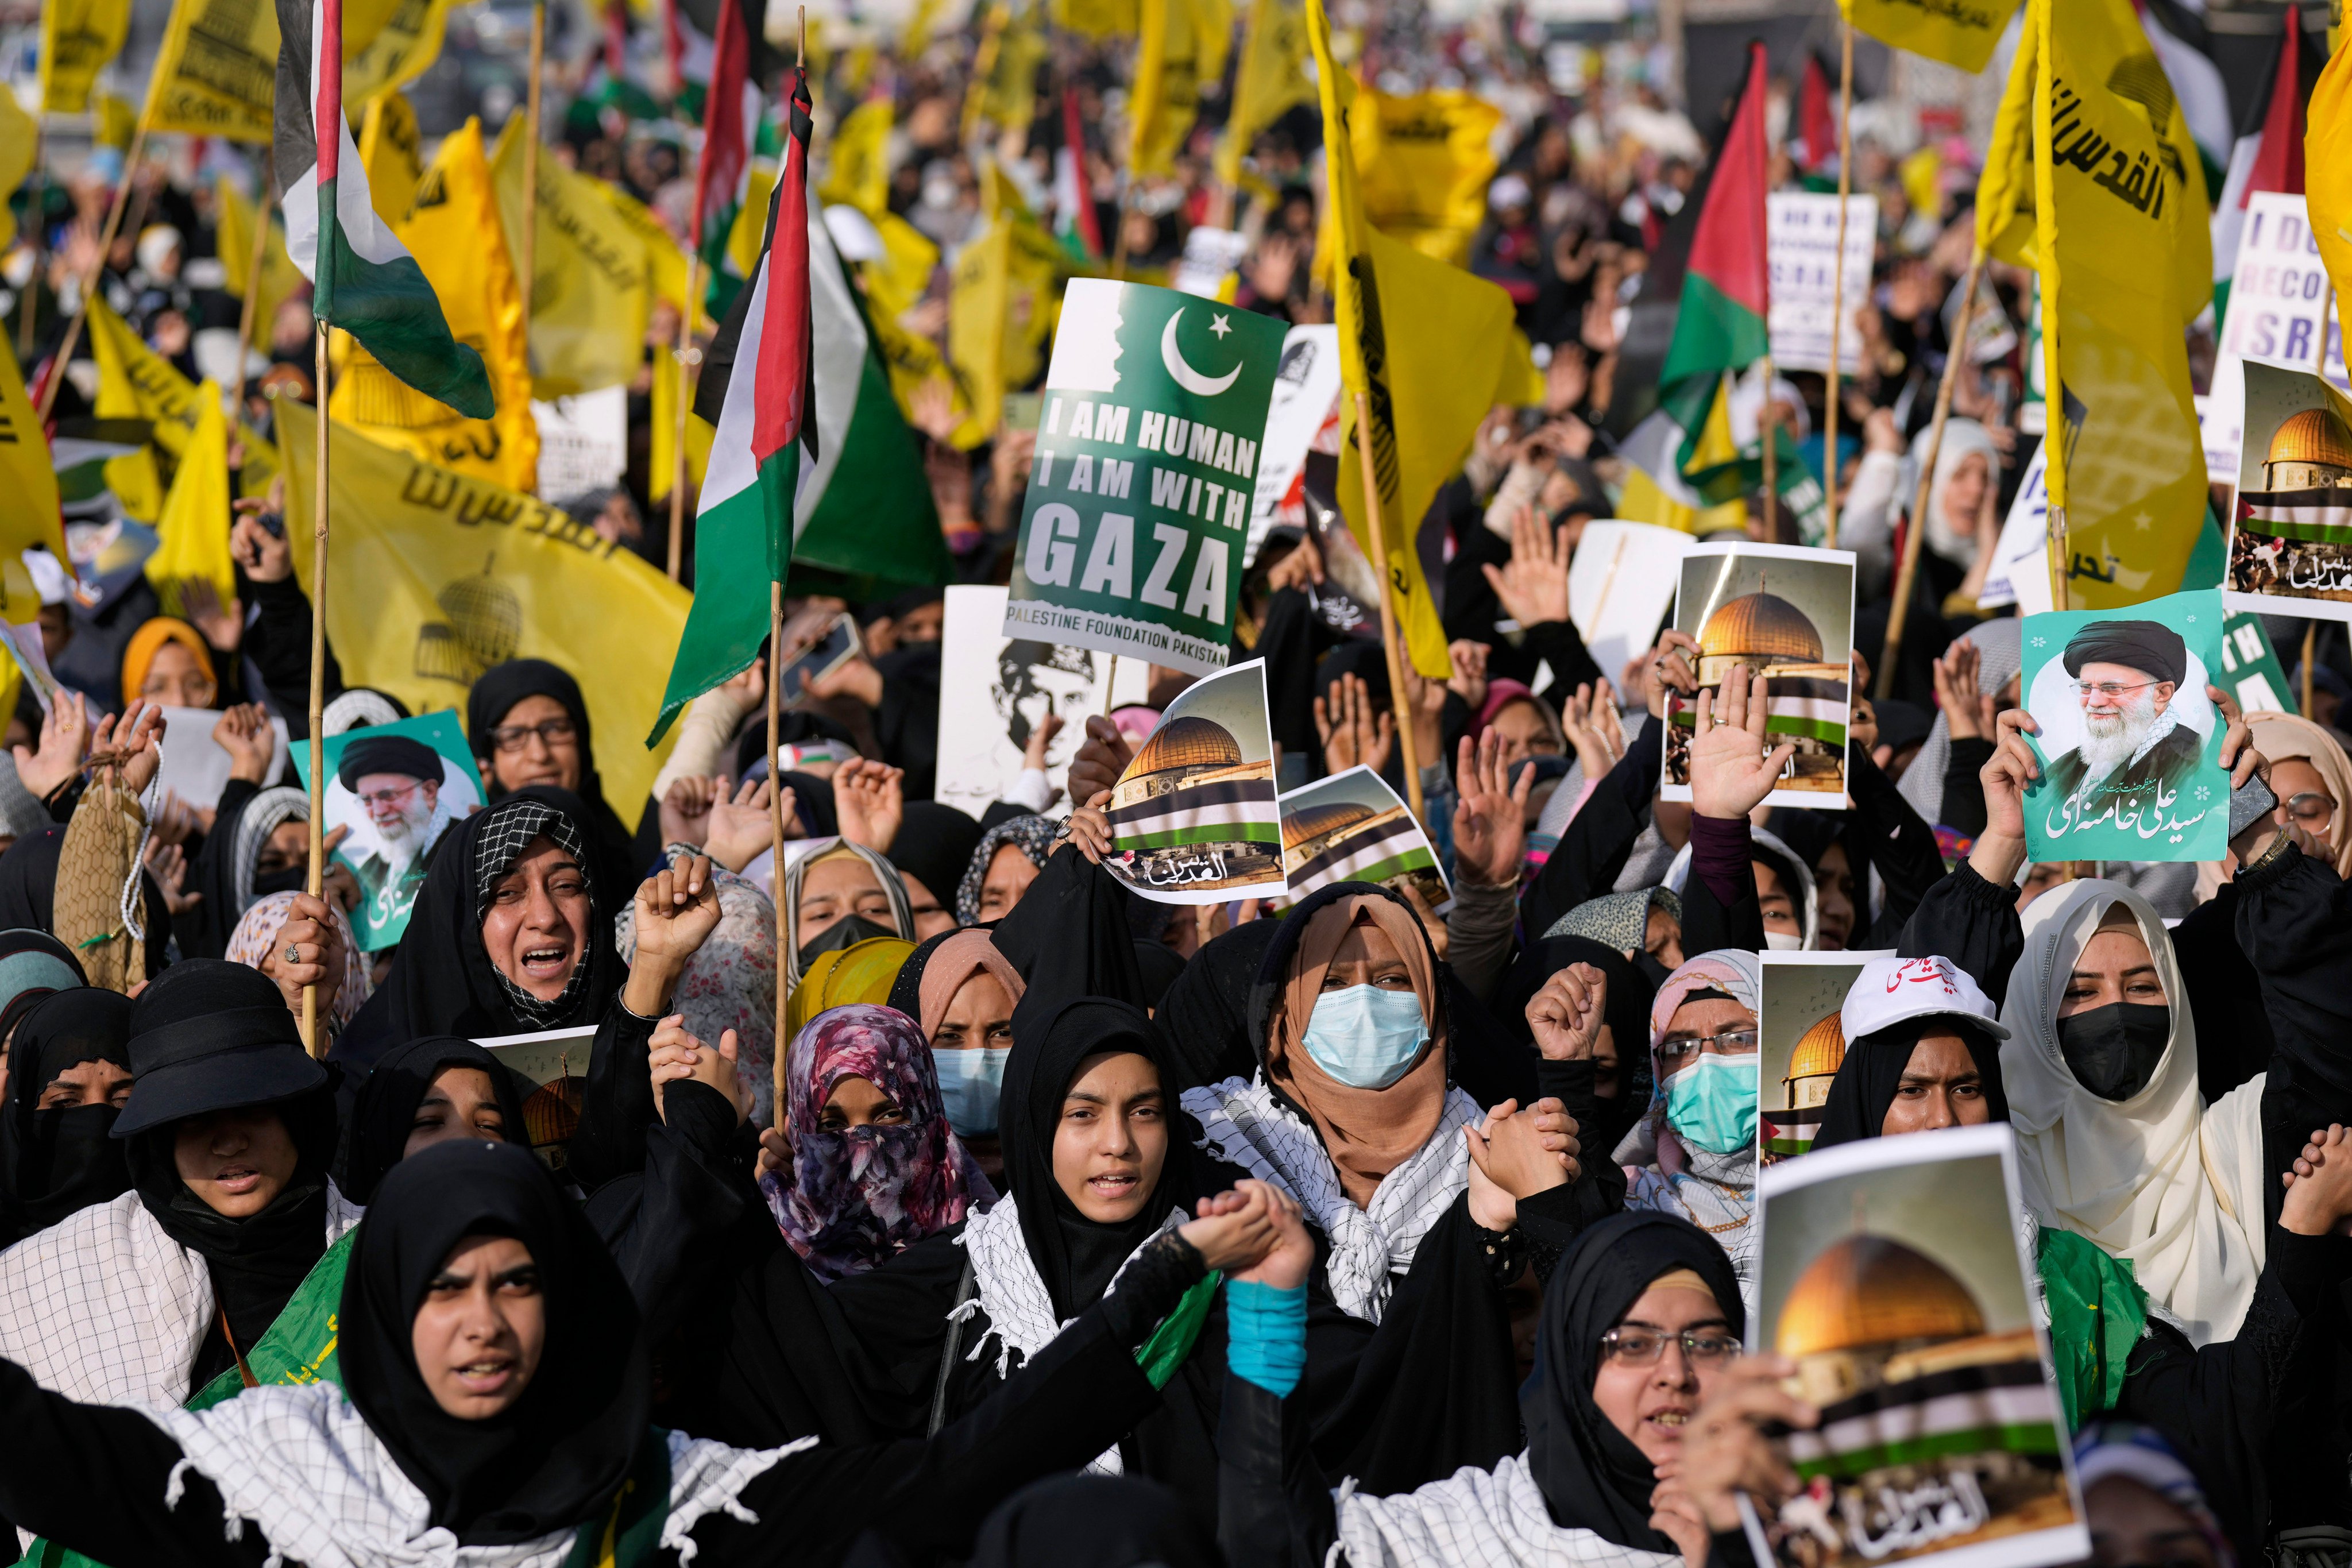 Shiite Muslims take part in an annual Al-Quds Day rally in Karachi. Islamic State, which harbours a virulent hatred for Iran’s dominant Shiite group, claimed responsibility for two explosions in Iran in January that killed nearly 100 people. Photo: AP